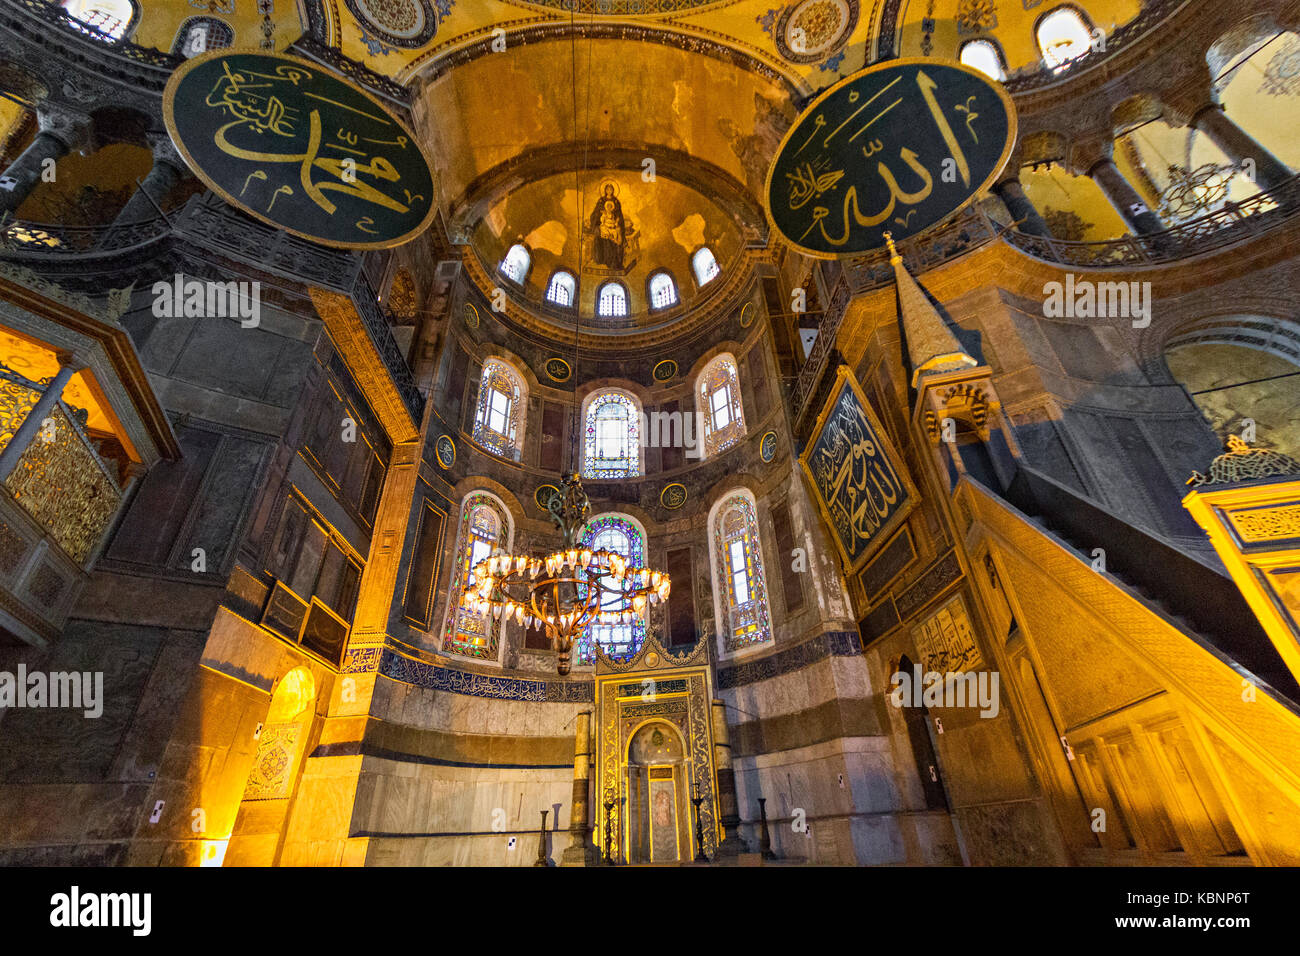 Interior of the Byzantine cathedral of Hagia Sophia, in Istanbul, Turkey. Stock Photo